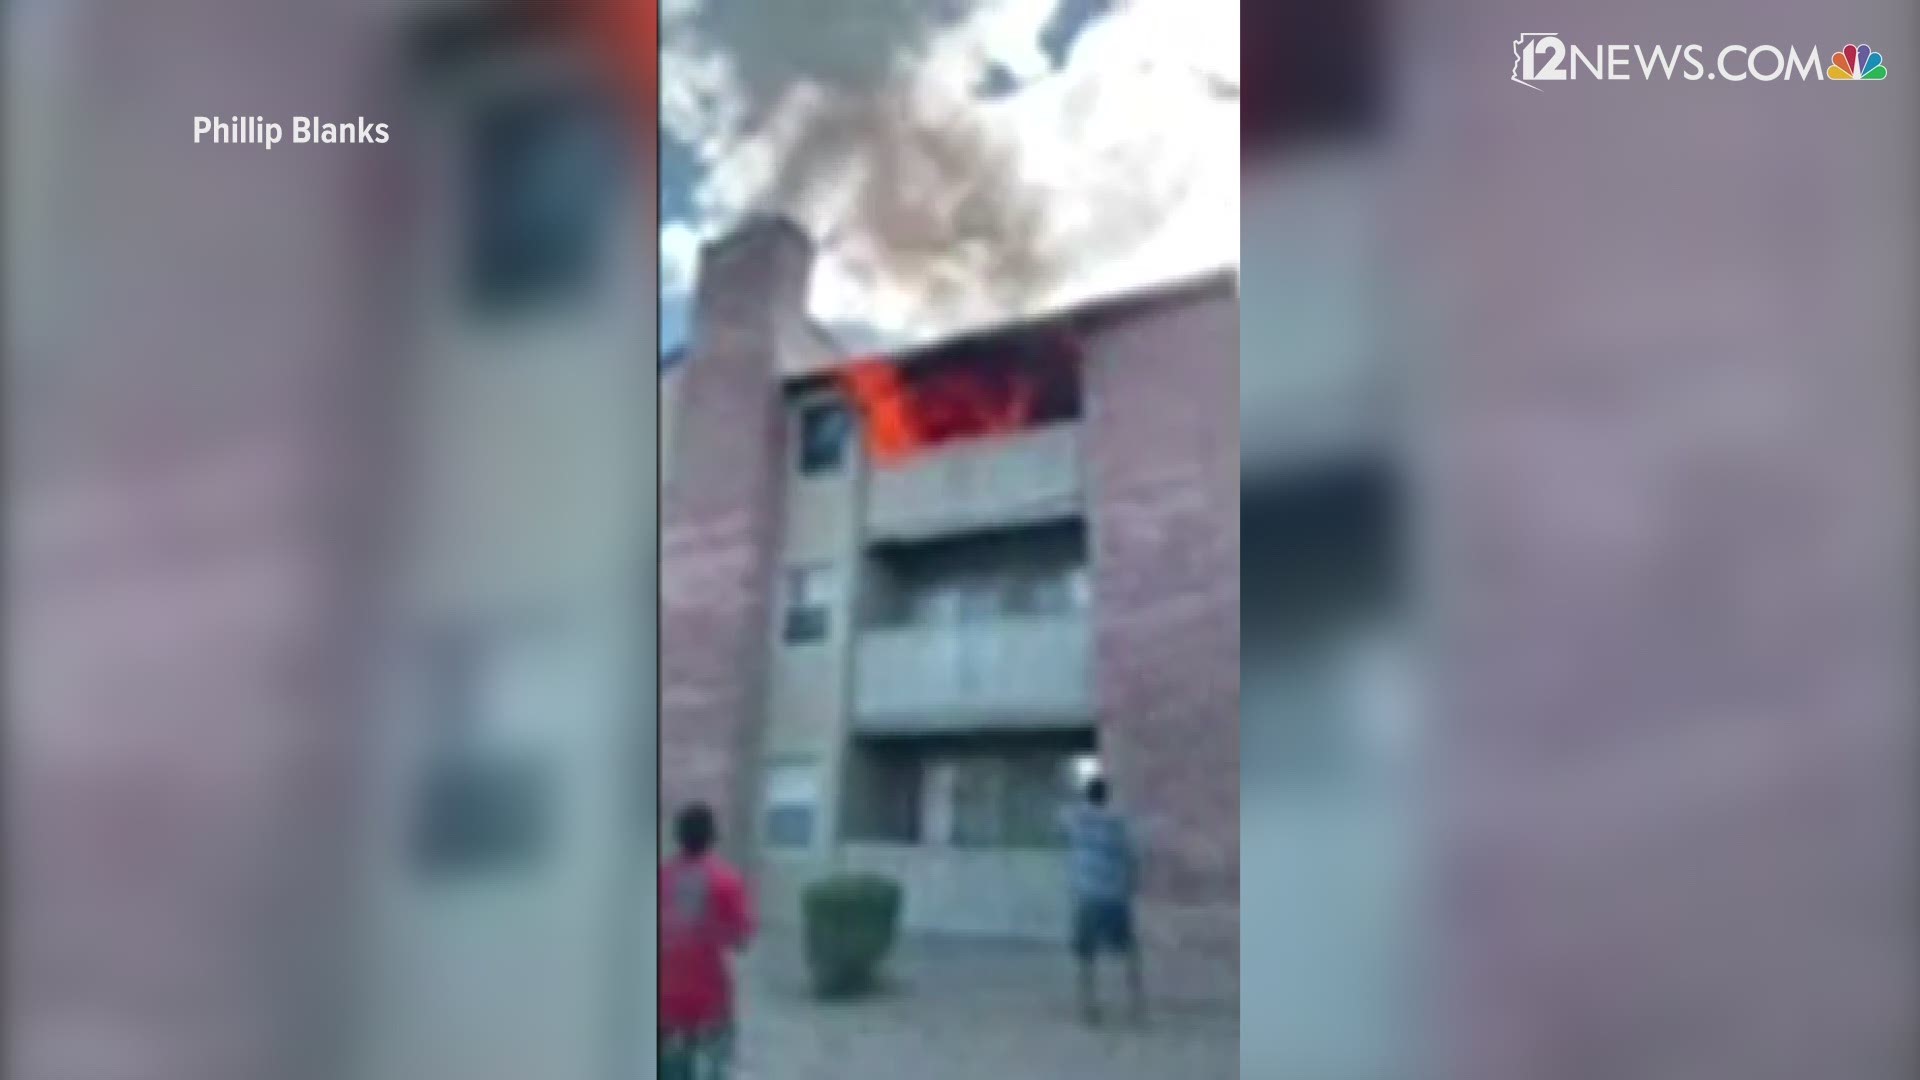 Video from an apartment fire in Phoenix shows a man catching a 3-year-old dropped from the burning fire. A man who caught the toddler is being hailed as a hero.